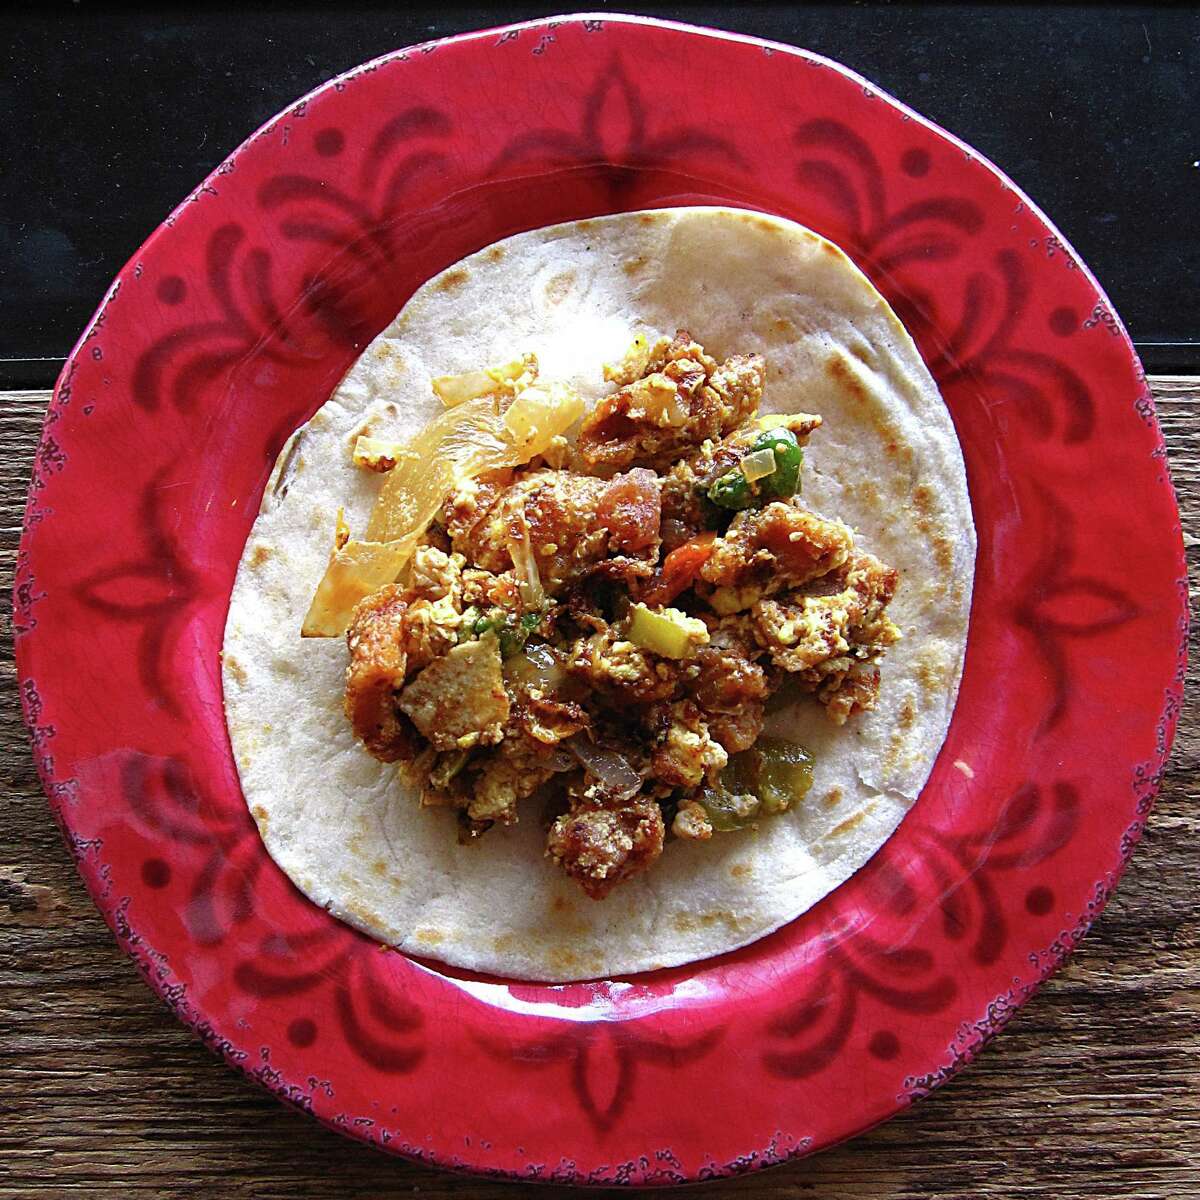 Taco of the Week: Chicharrón and egg a la mexicana taco on a handmade flour tortilla from Chaparritas Mexican Restaurant.